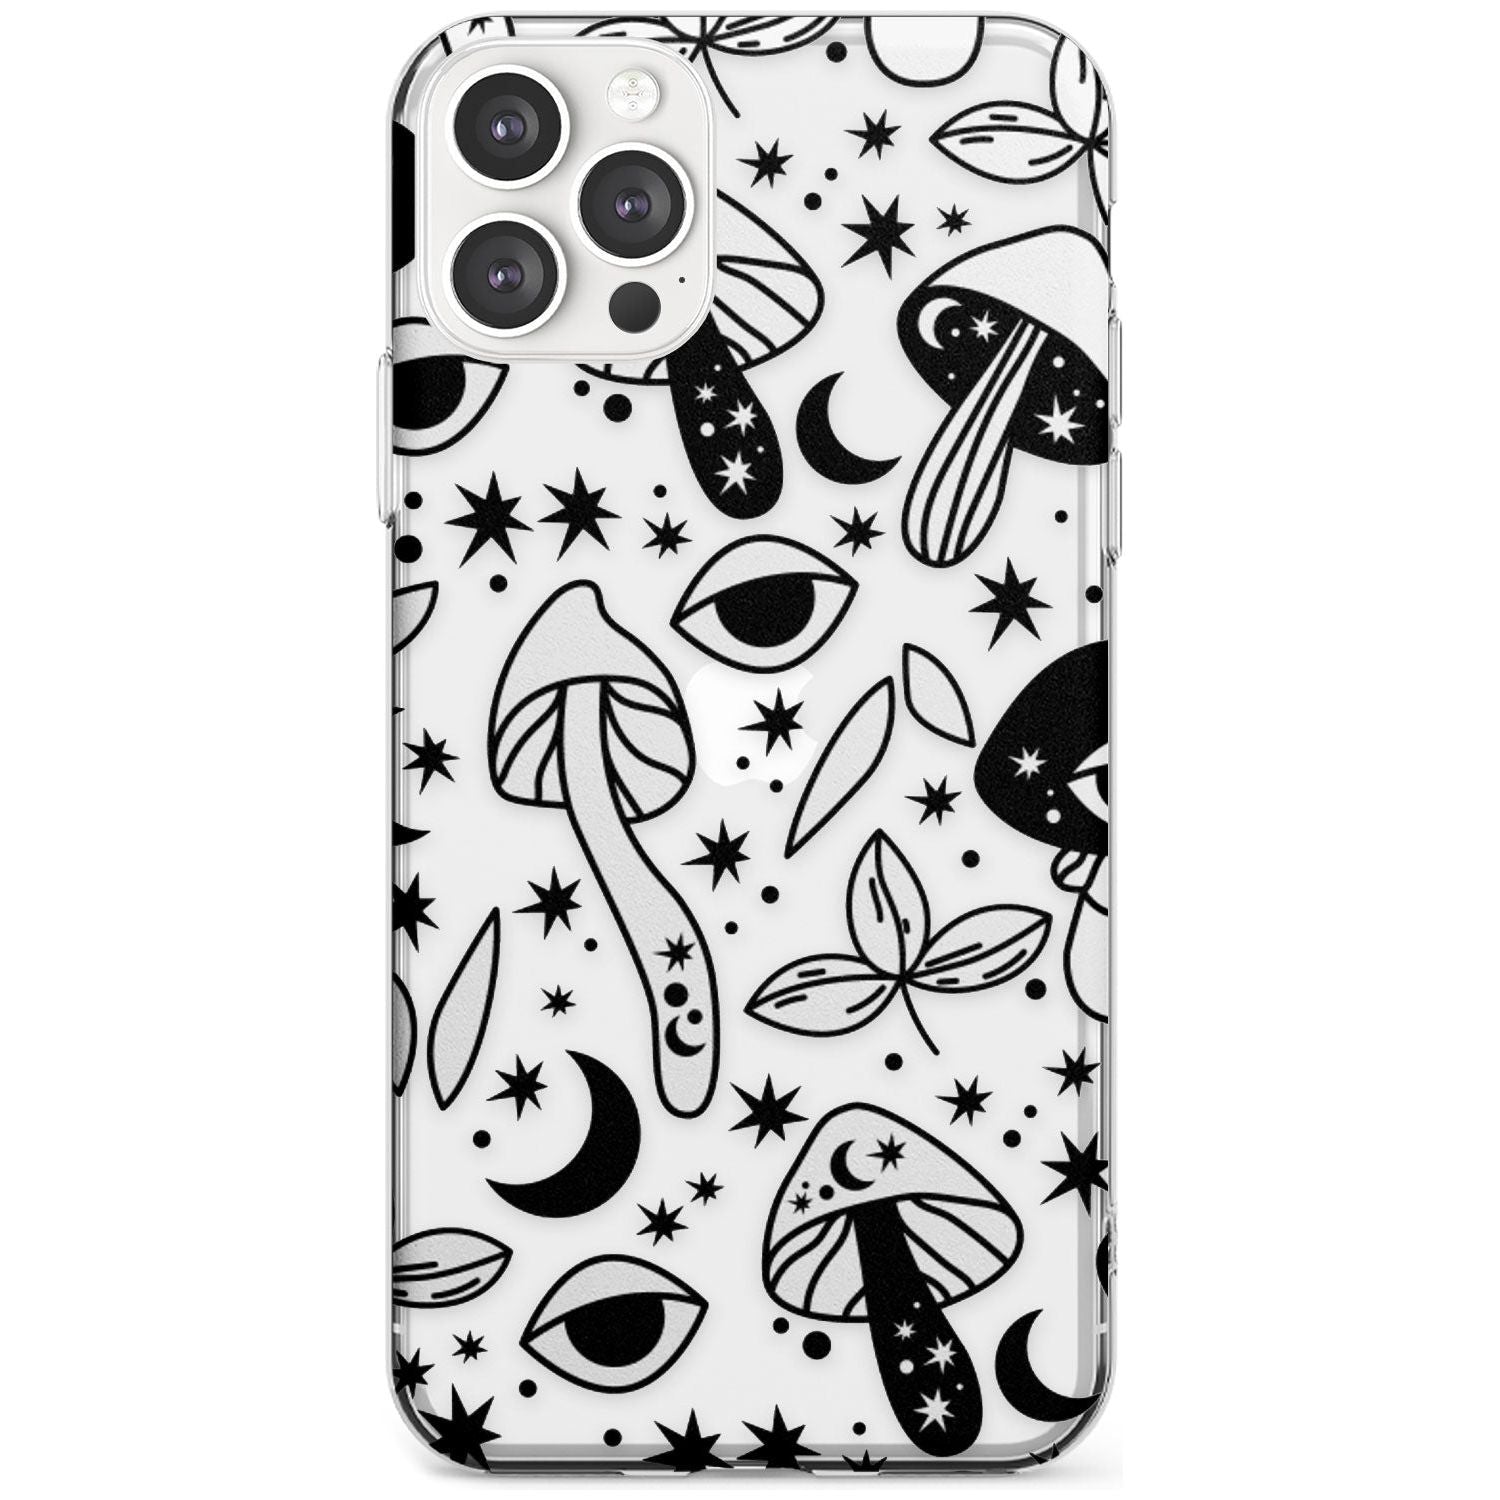 Psychedelic Mushrooms Pattern Slim TPU Phone Case for iPhone 11 Pro Max